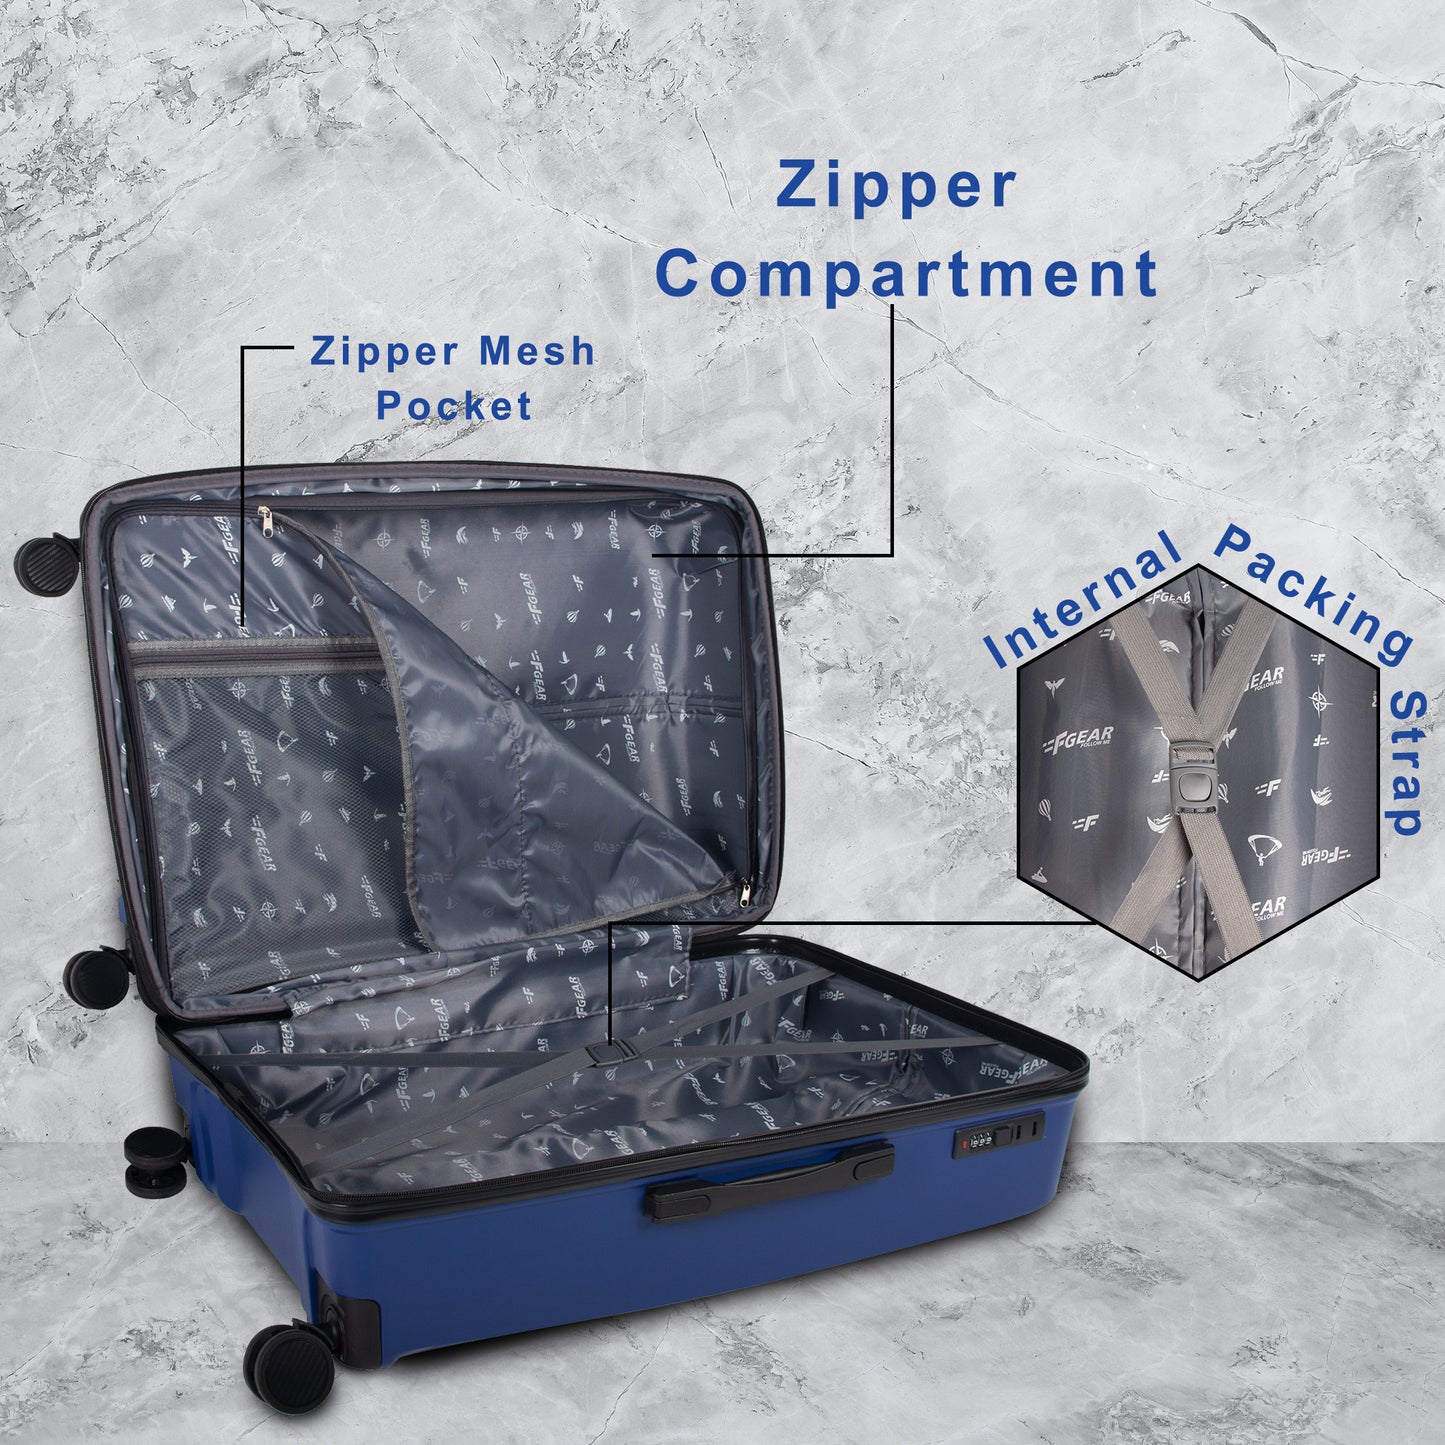 STV PP03 28" Light Blue Expandable Large Check-in Suitcase